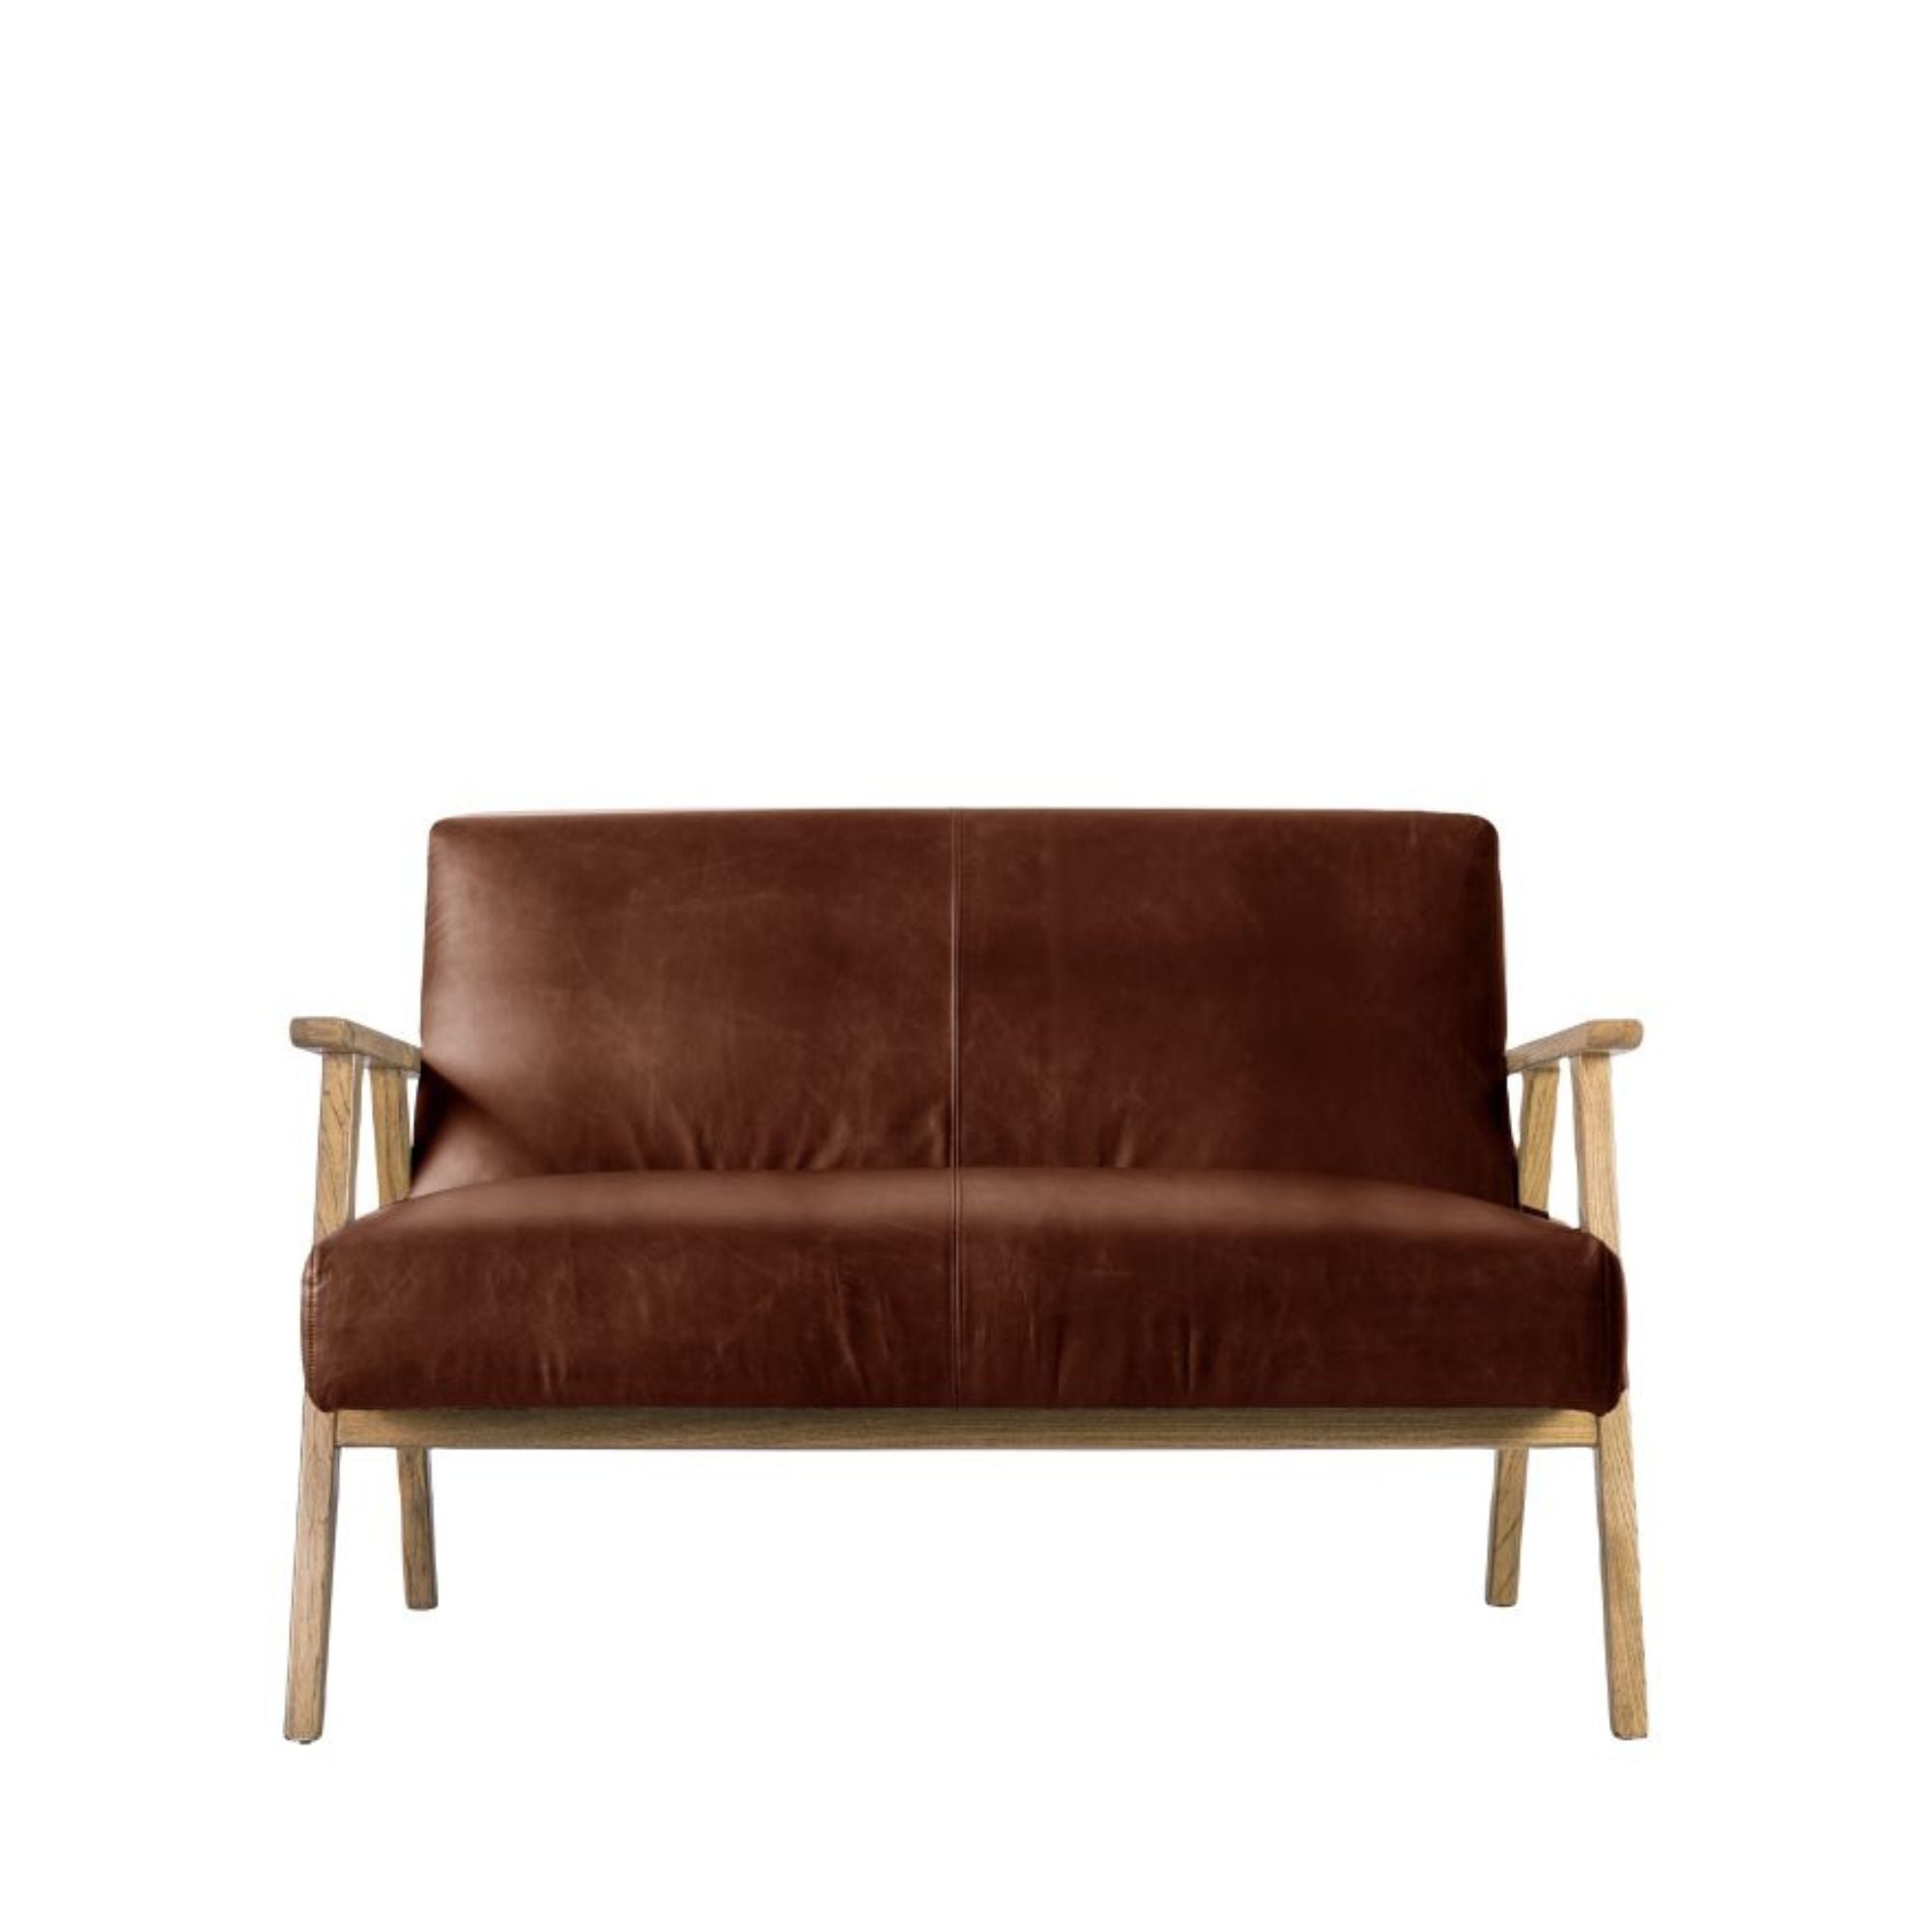 Barret mid century style 2 seat sofa in vintage brown leather with solid ash frame | MalletandPlane.com